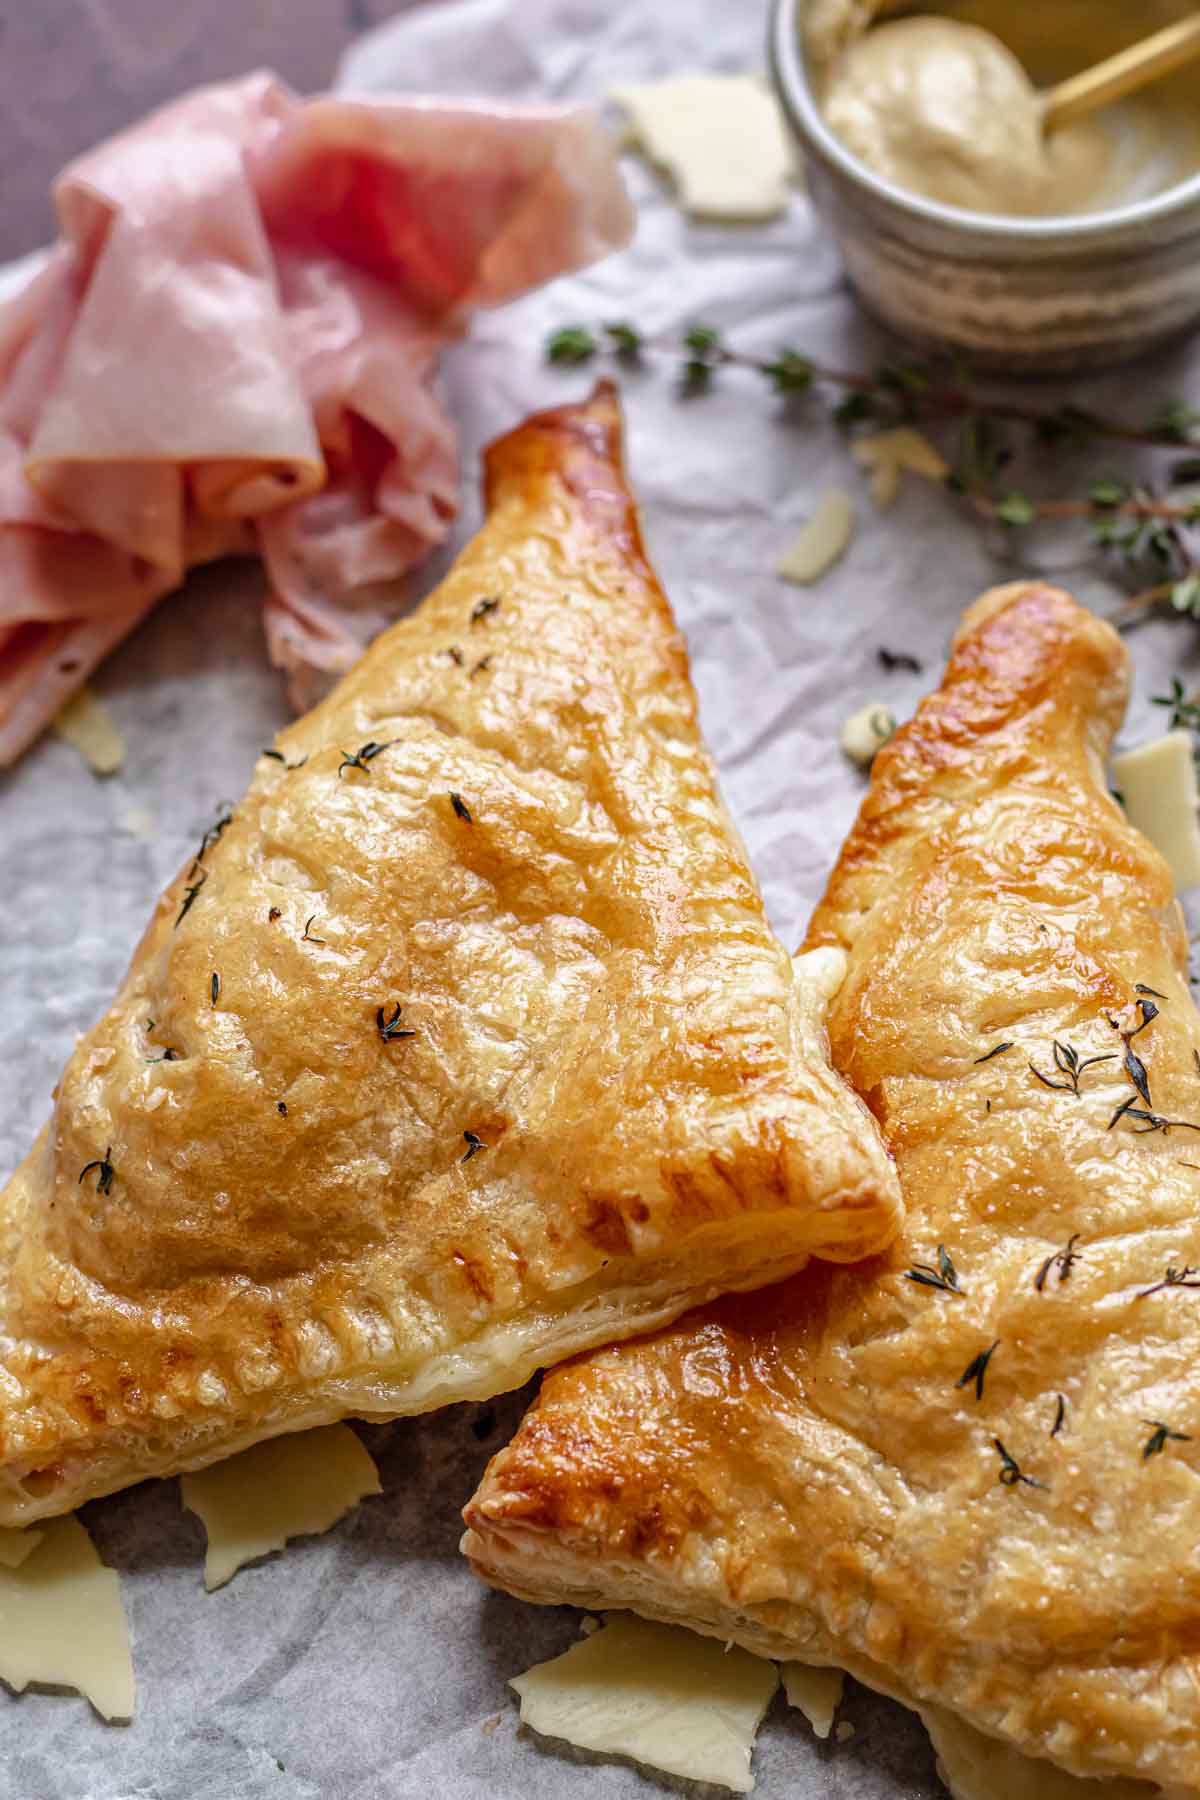 Two ham and cheese turnovers.